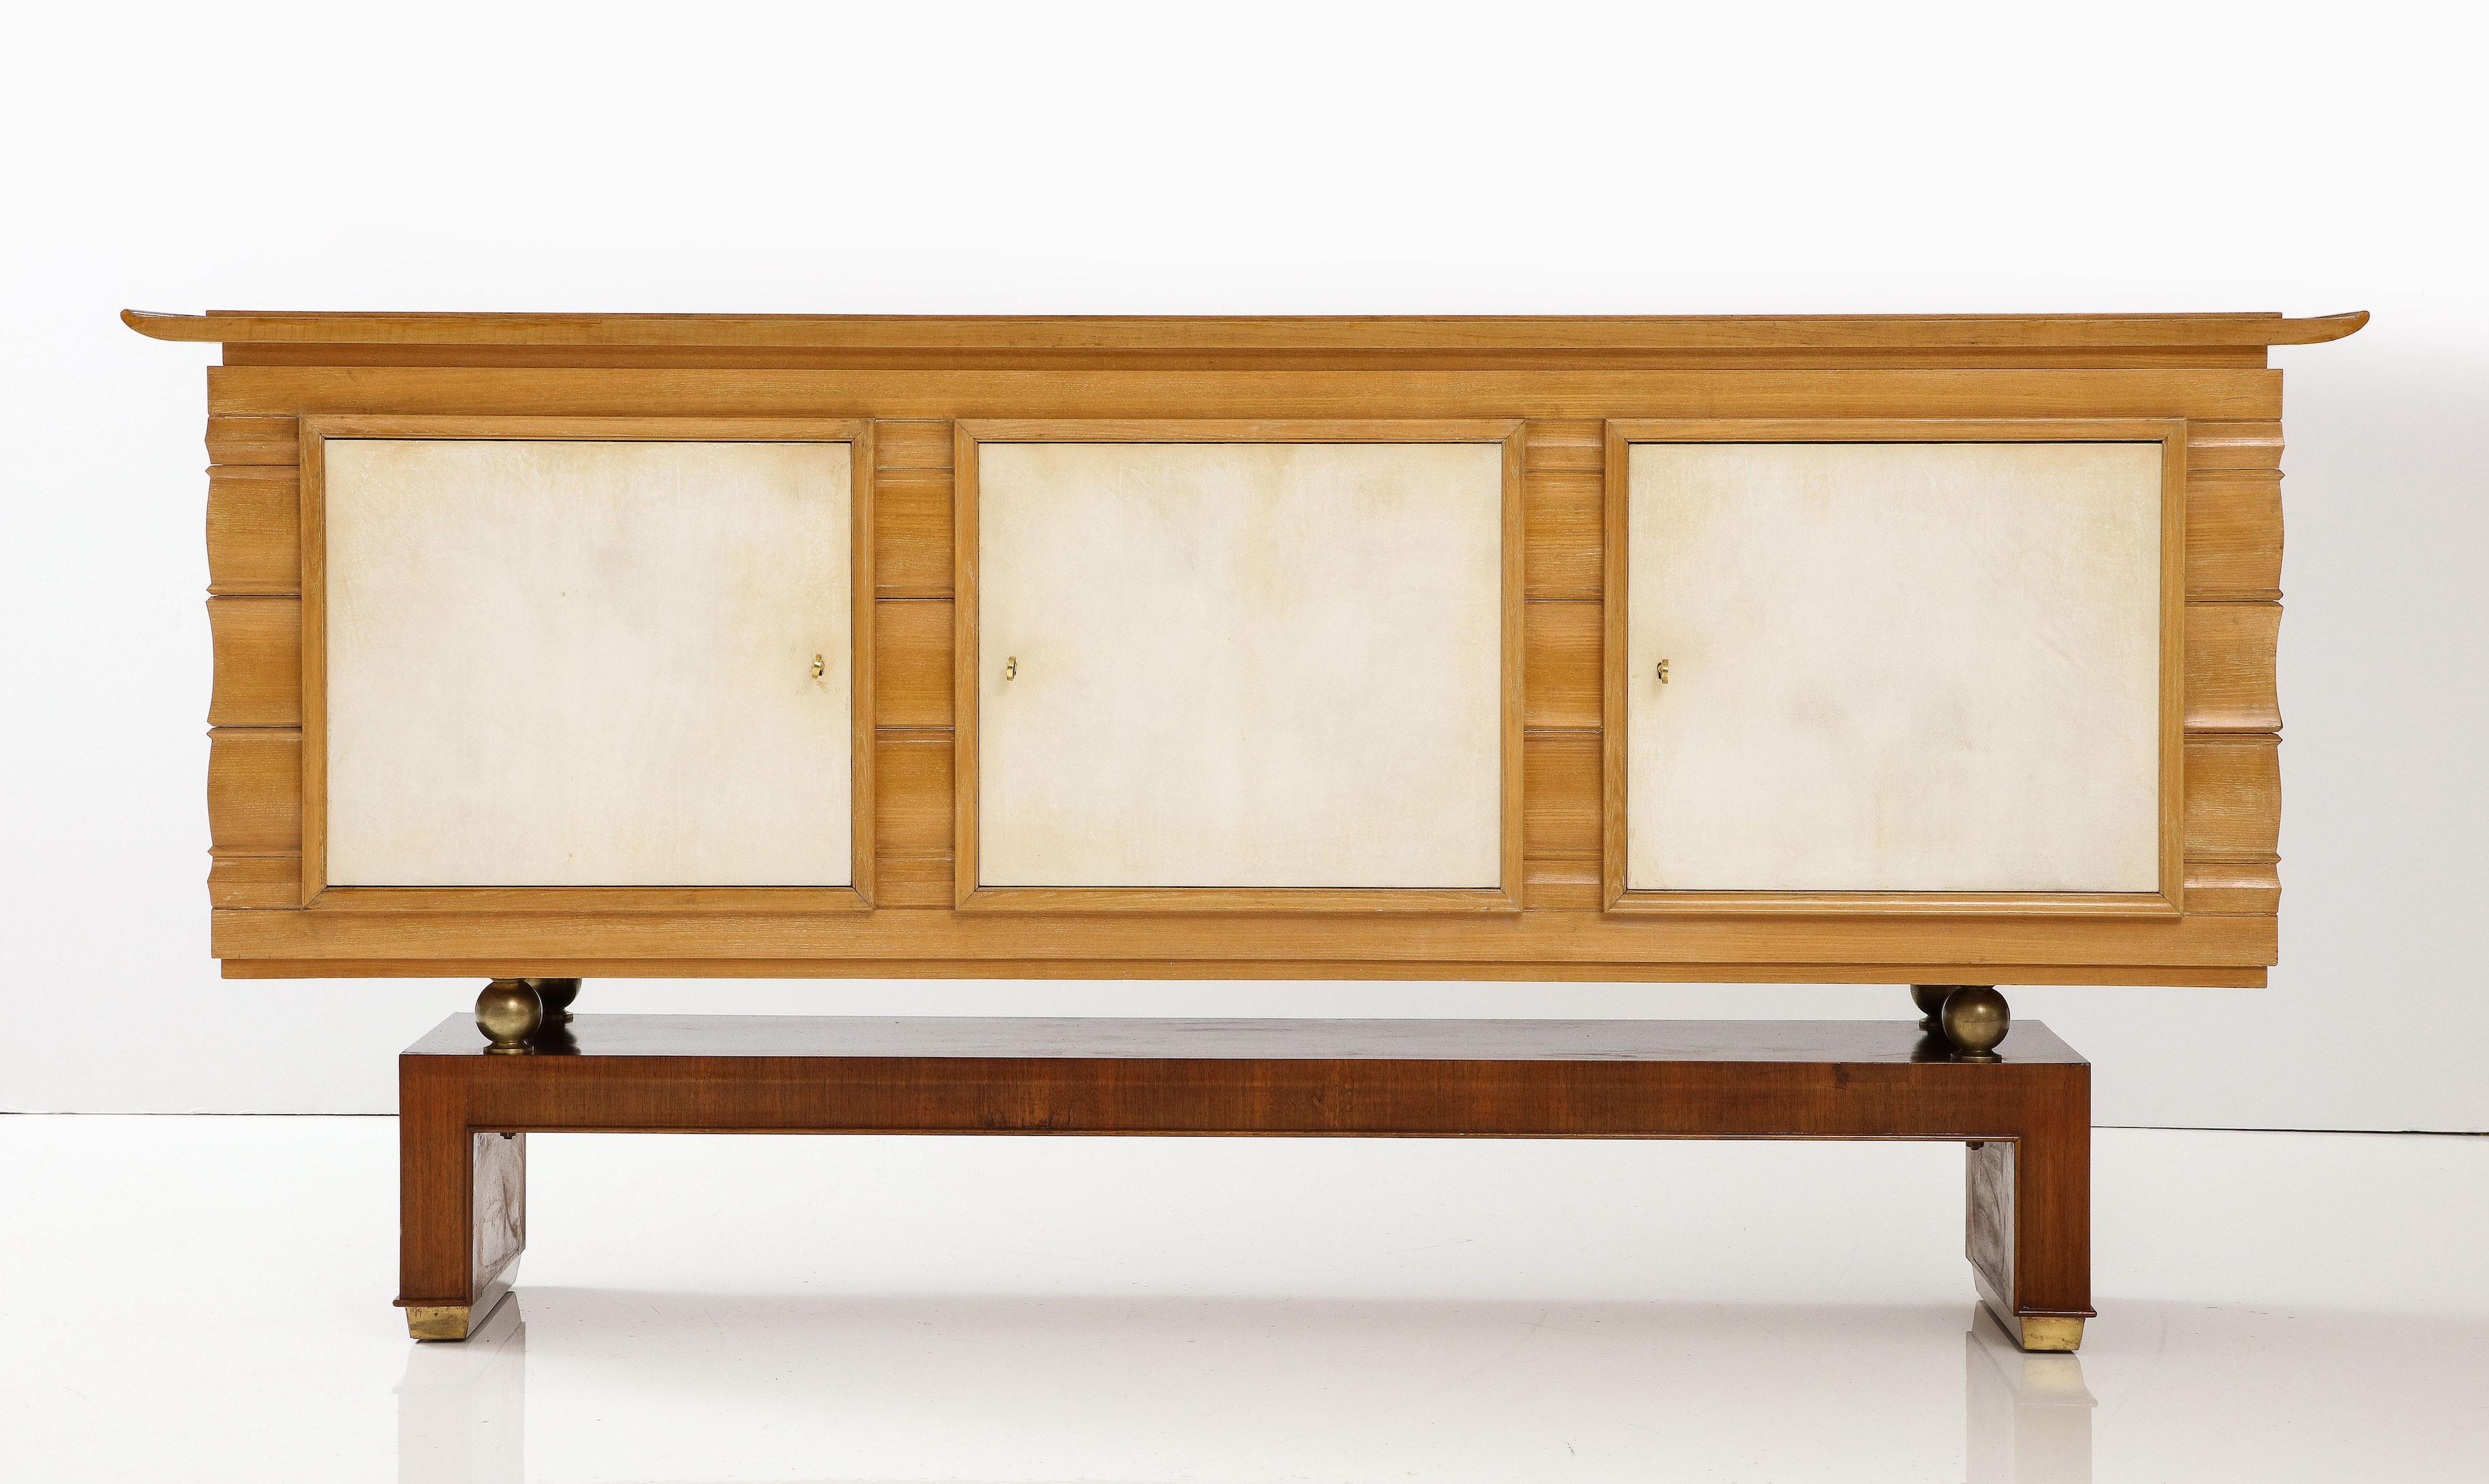 Elegant shaped oak buffet by Maxime Old with inset parchment doors resting on four polished brass ball feet over a walnut veneer platform base.   Provenance : private collection Los Angeles California.